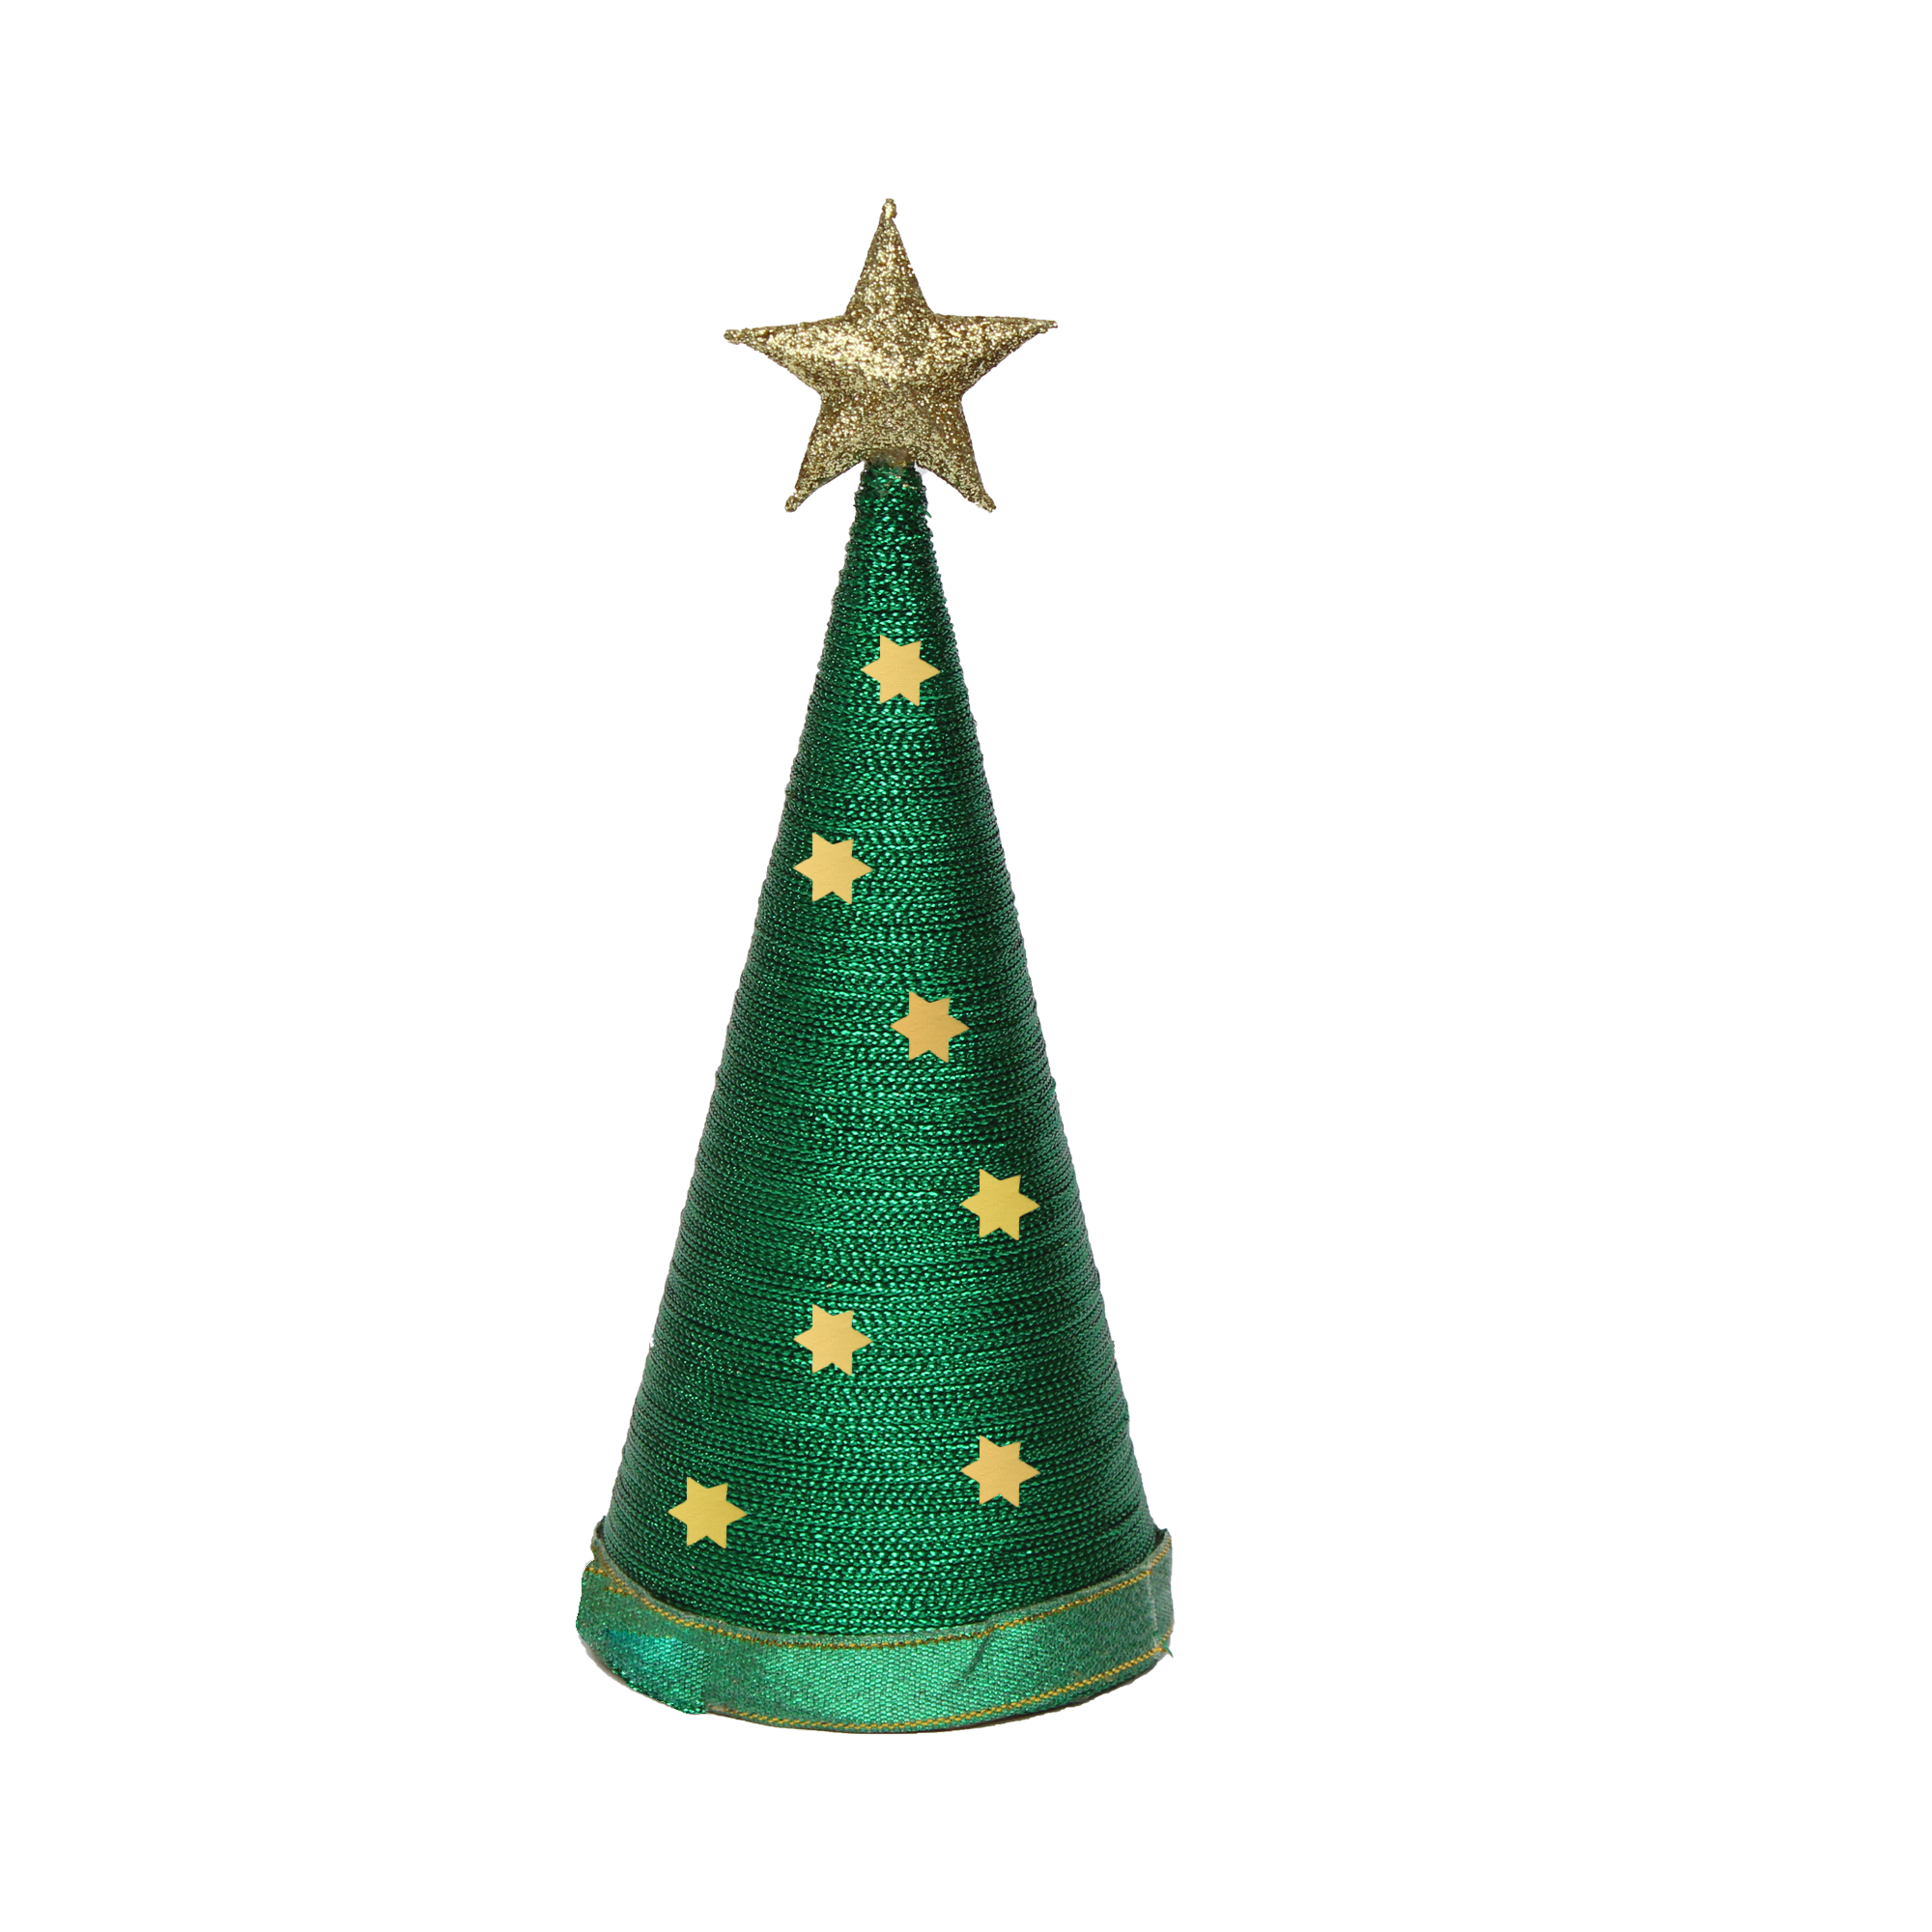 Handmade Conical Christmas Lurex Tree with Sequins and Star - Height 8 X Width3inch, Green, 1pc